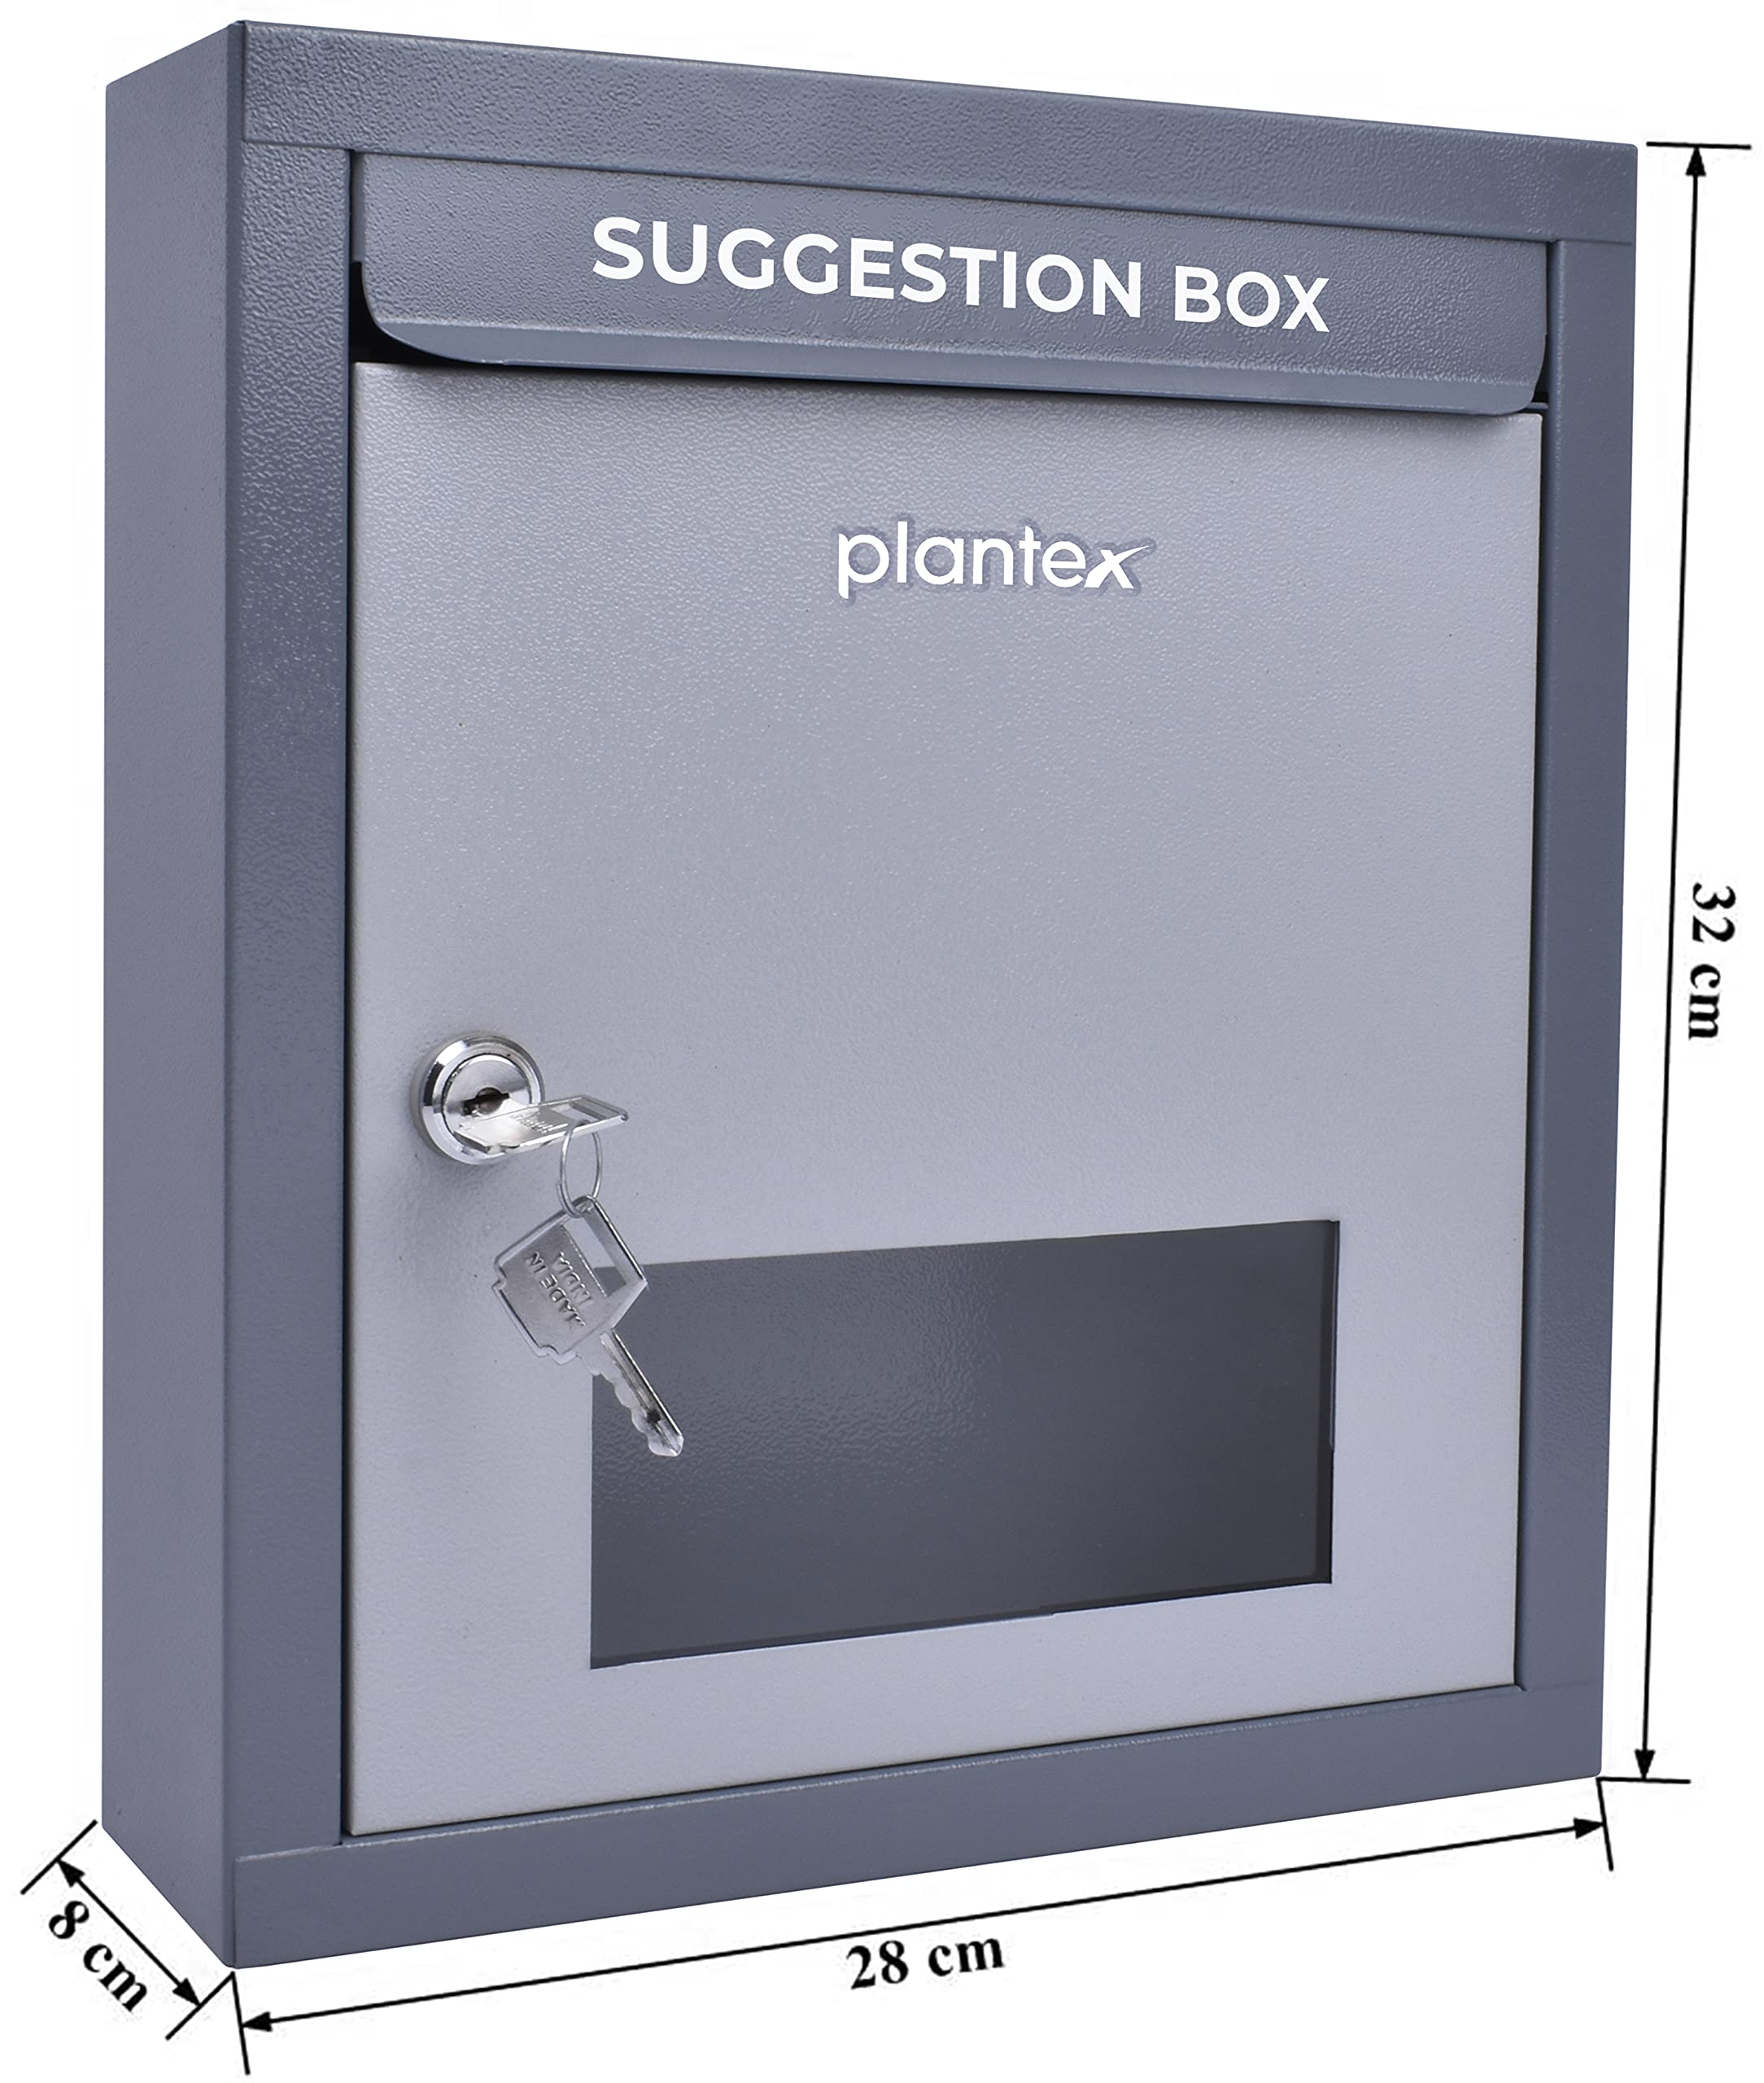 Plantex All in 1 Multipurpose Letter/Suggestion Box/Complaint /Donation Box with Lock Table Top or Wall Mount (Grey)